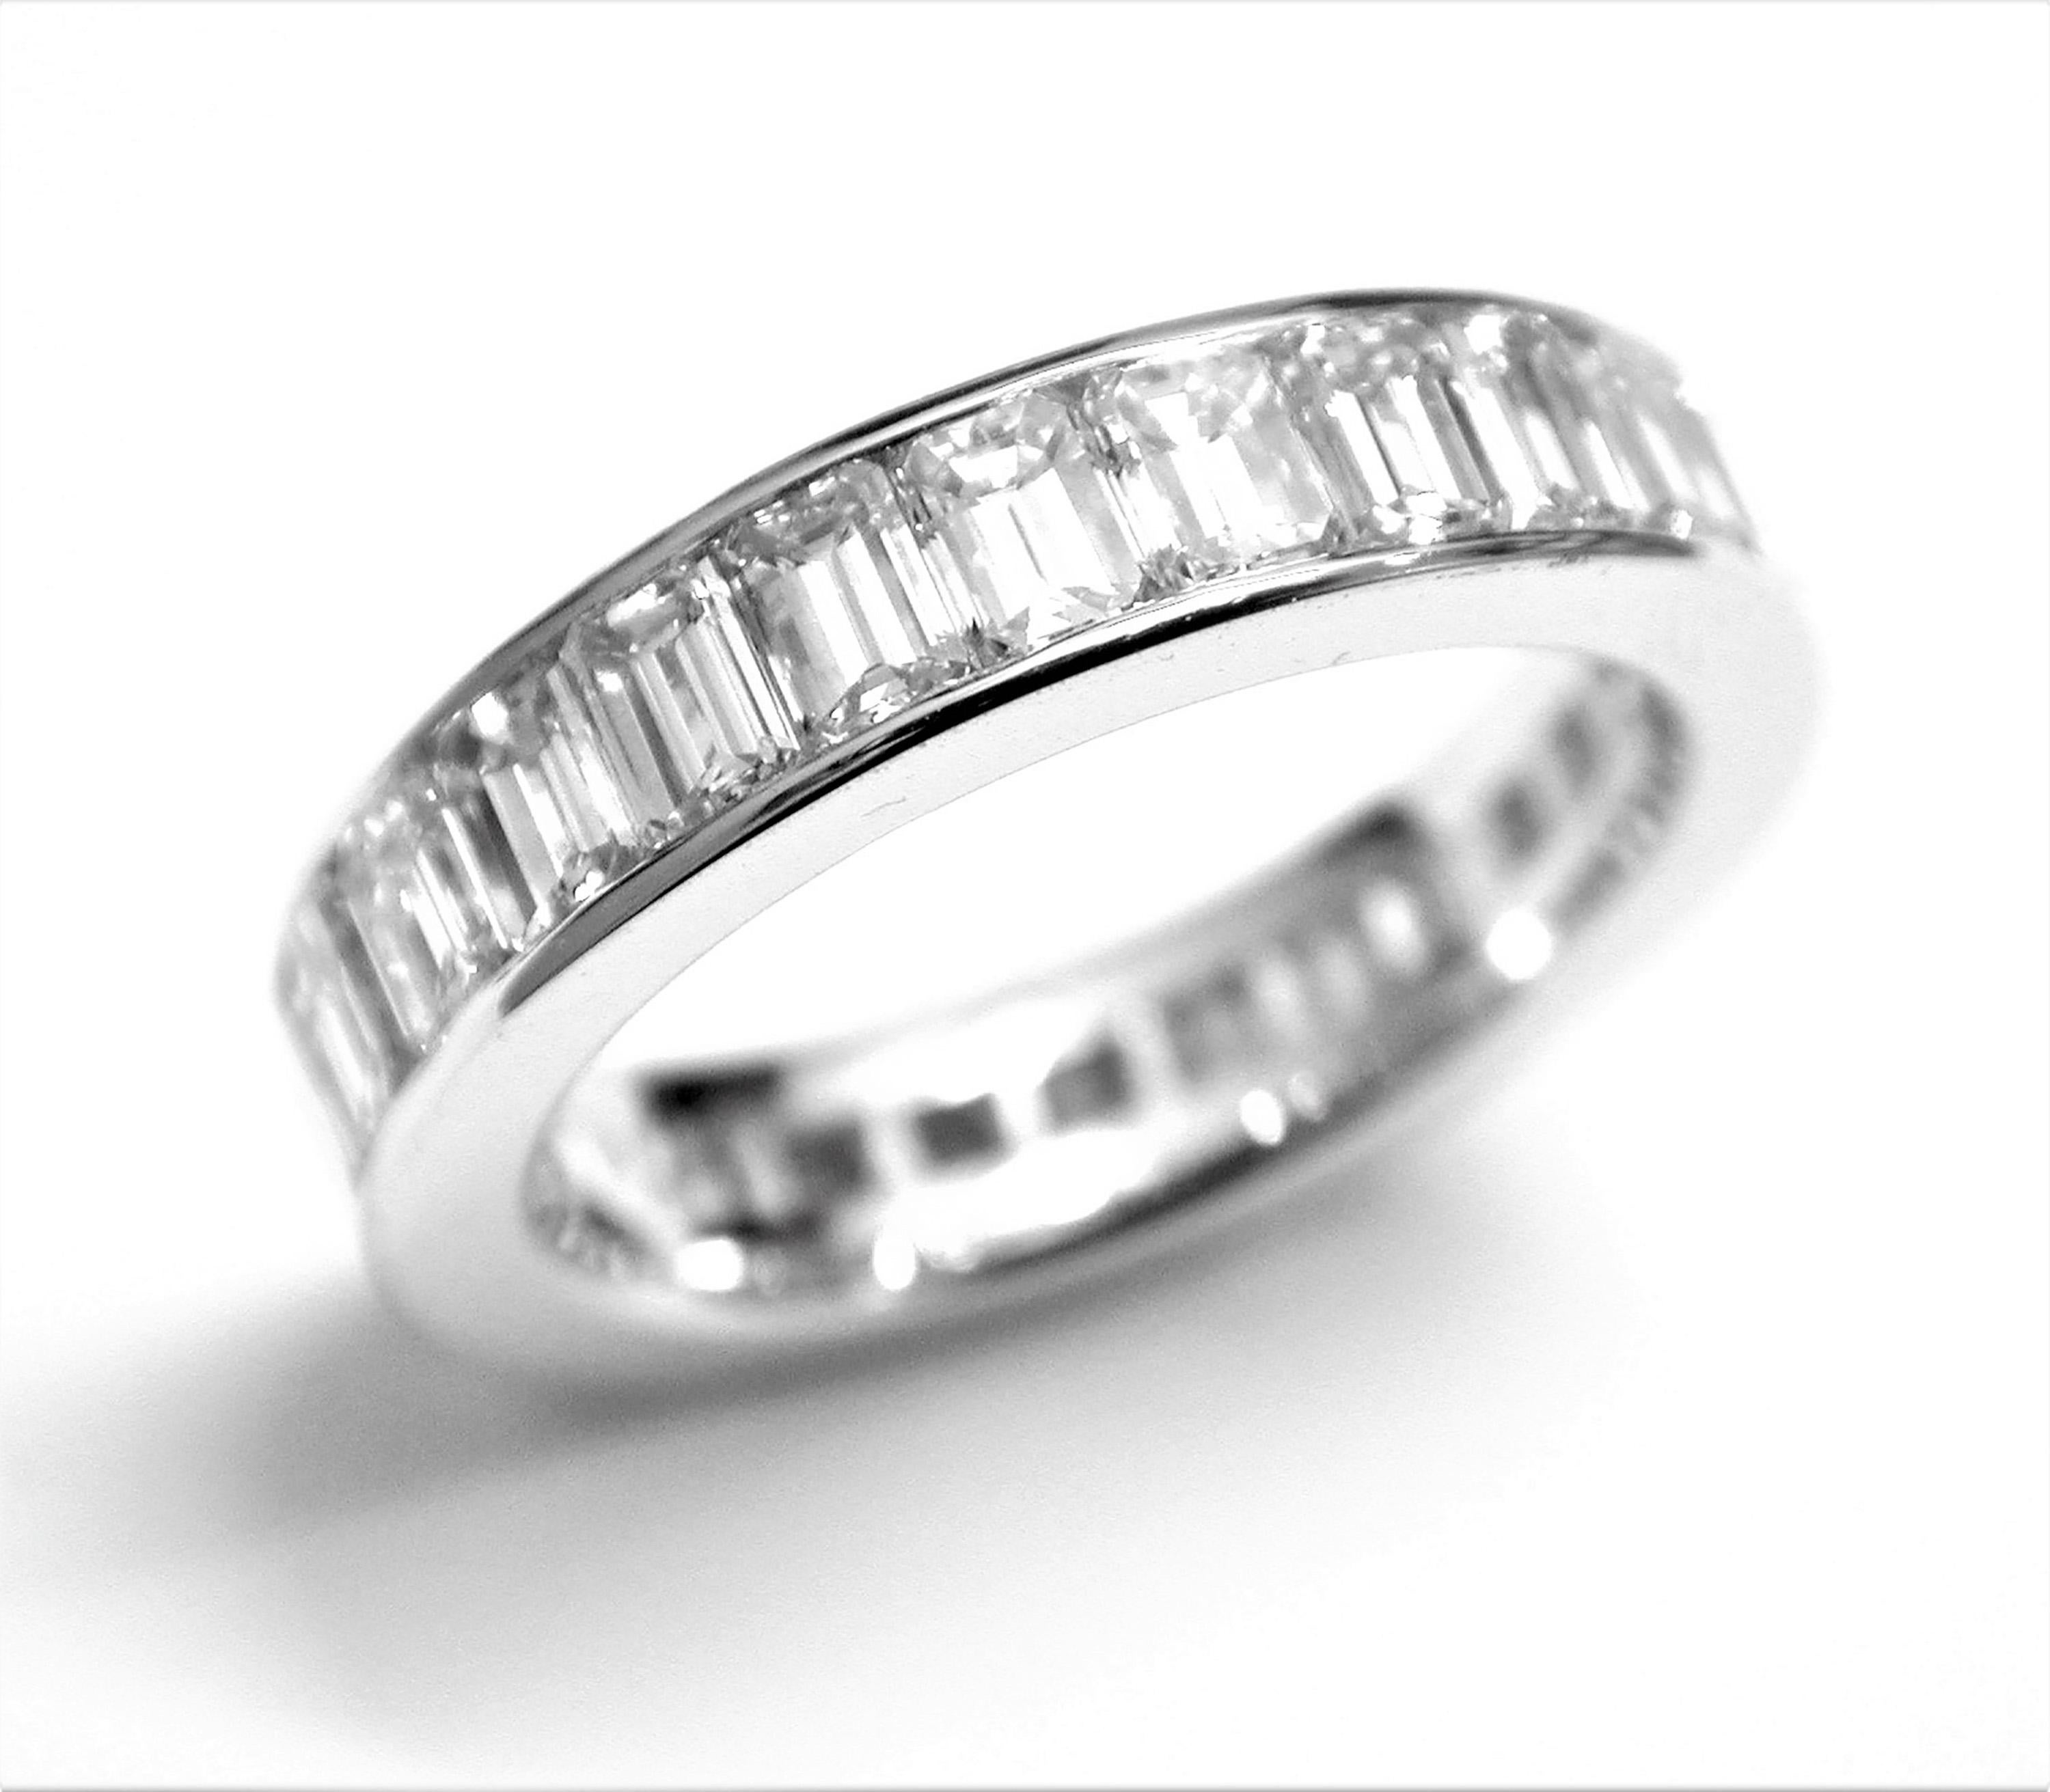 Platinum diamond channel set eternity ring
Emerald-Cut Diamond weighing 3.70 carats 
Each diamonds measures 3.7 millimeters long
Band measuring approximately 5 millimeters 
Made to order in all finger sizes
Special order rings are not refundable
Two